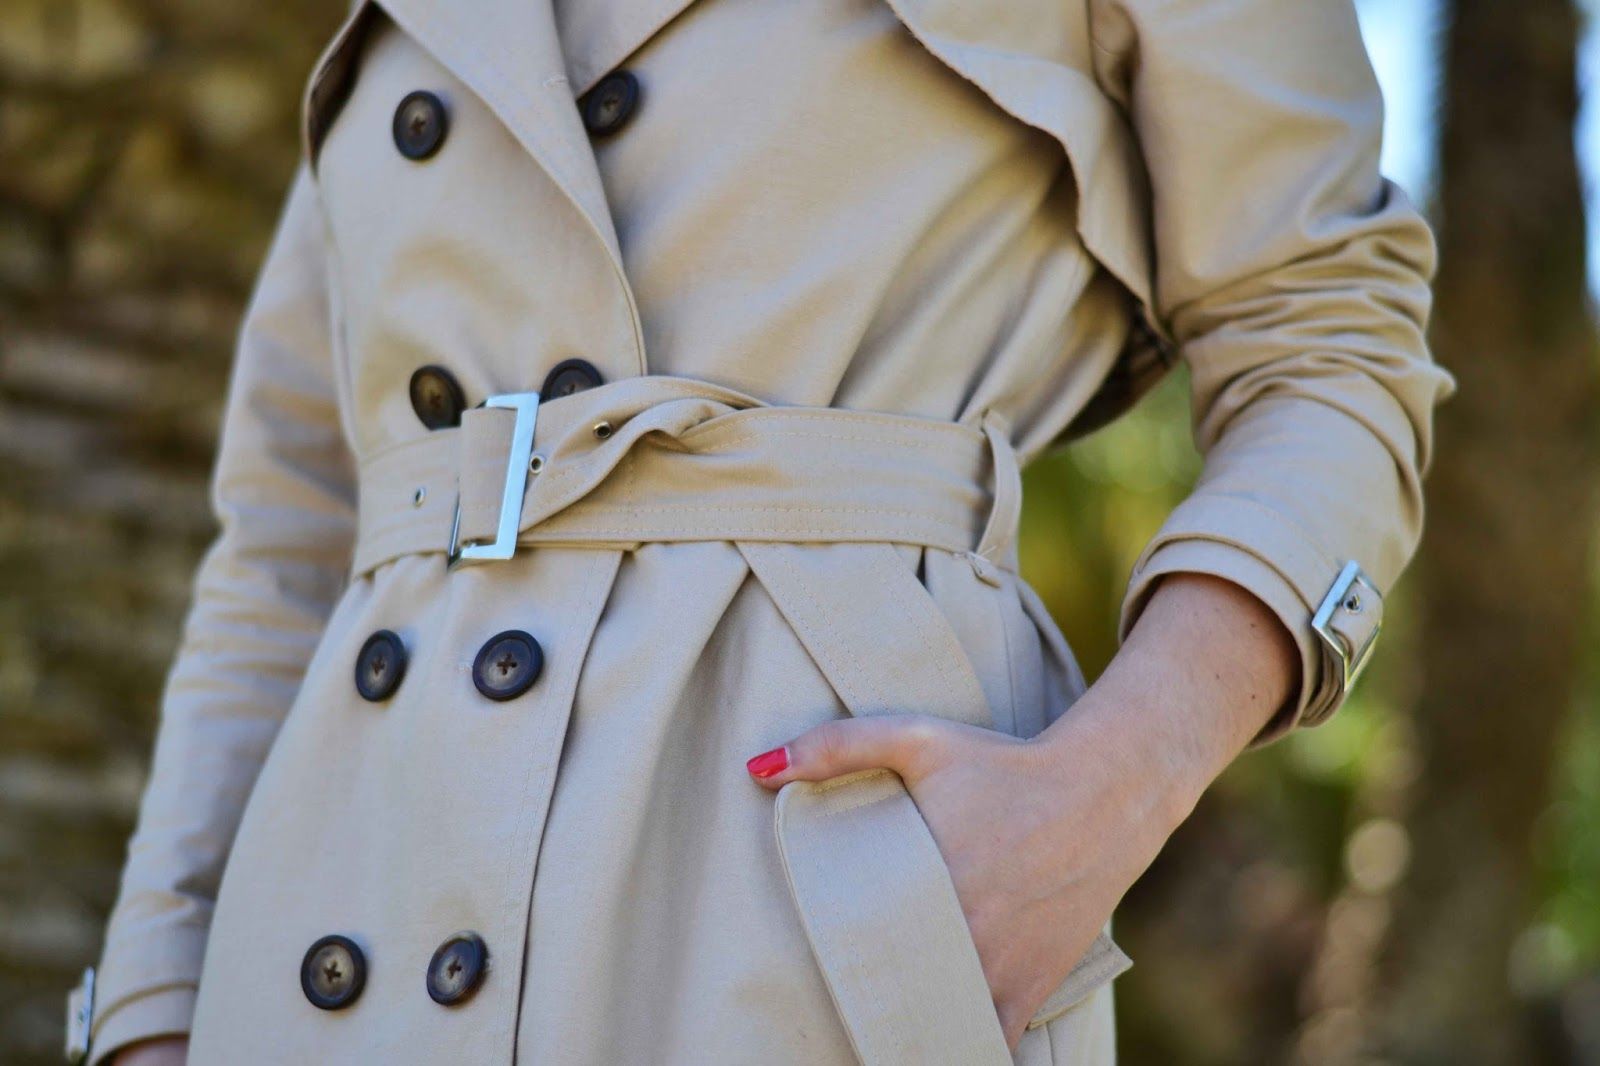 burberry trench coat pattern